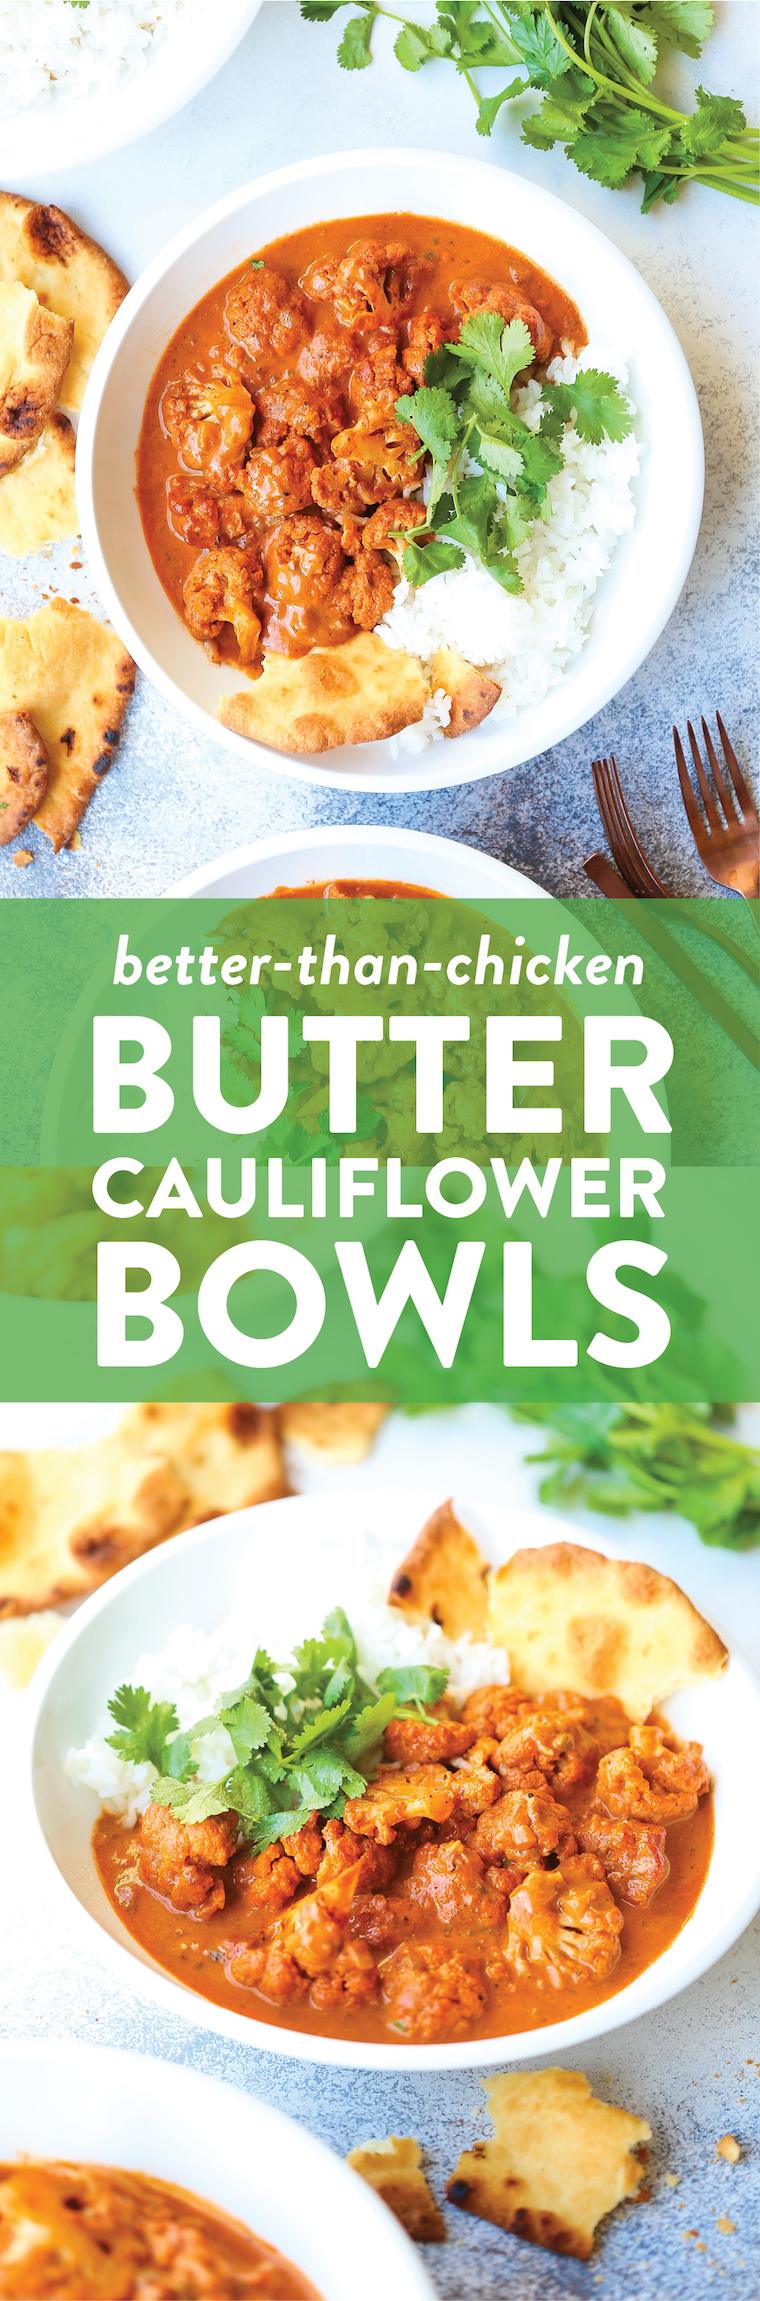 Butter Cauliflower Bowls - Indian butter chicken is made healthier + heartier with nutrient-loaded cauliflower! Just as creamy and flavorful, if not better!